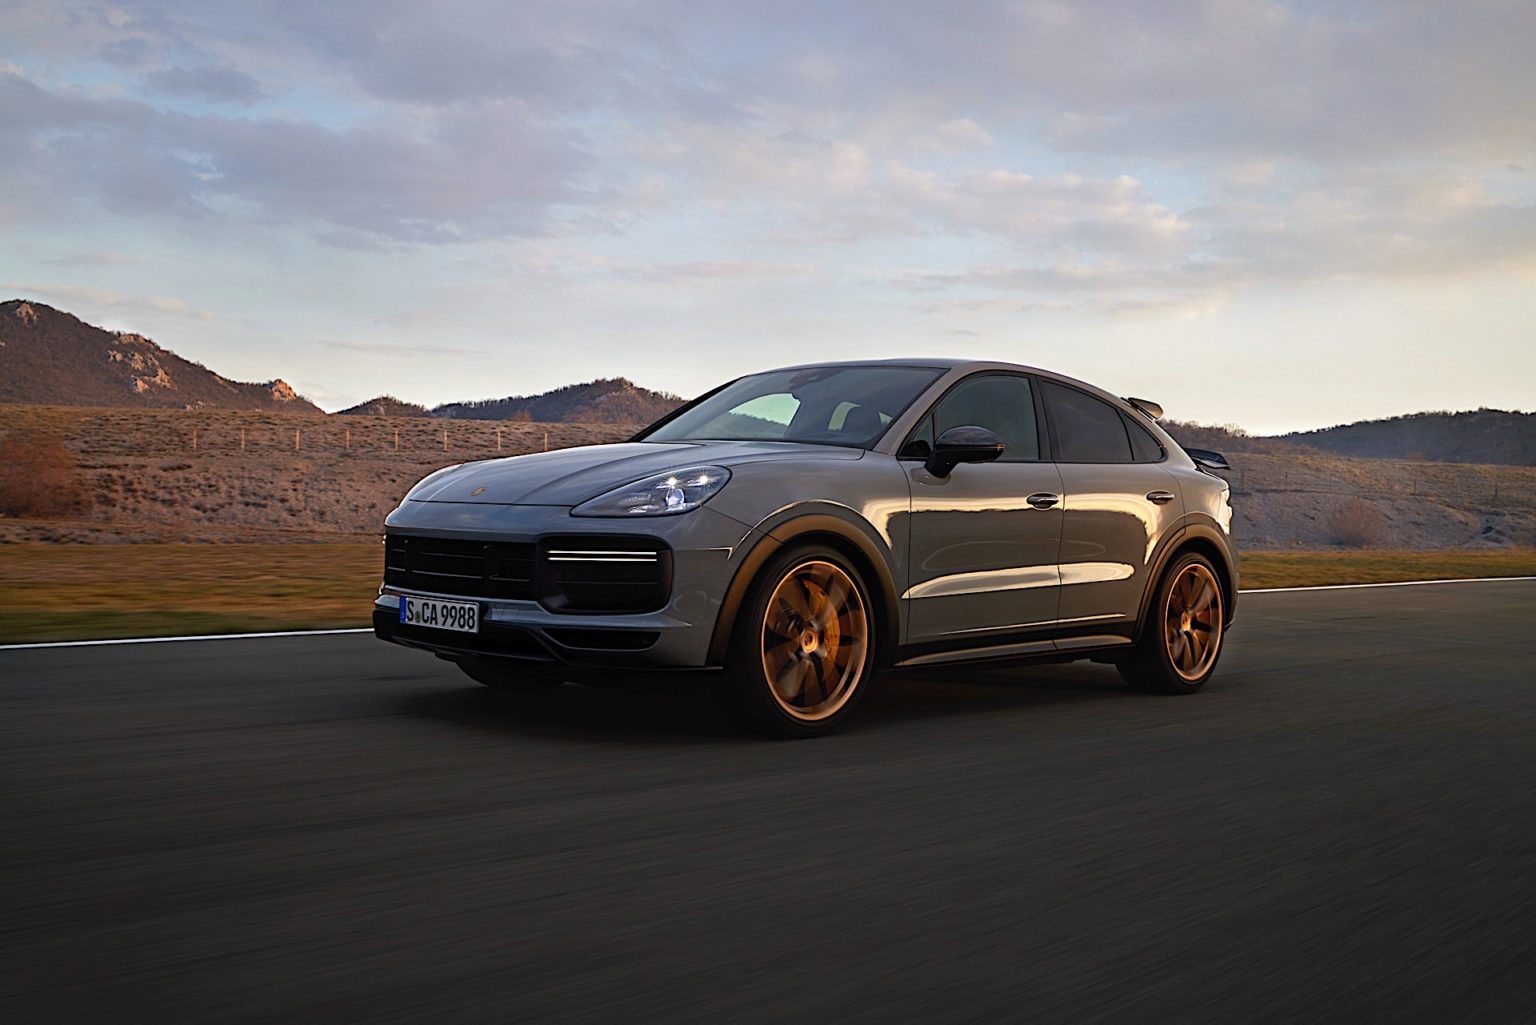 2015 Porsche Cayenne Turbo S - Wallpapers and HD Images | Car Pixel